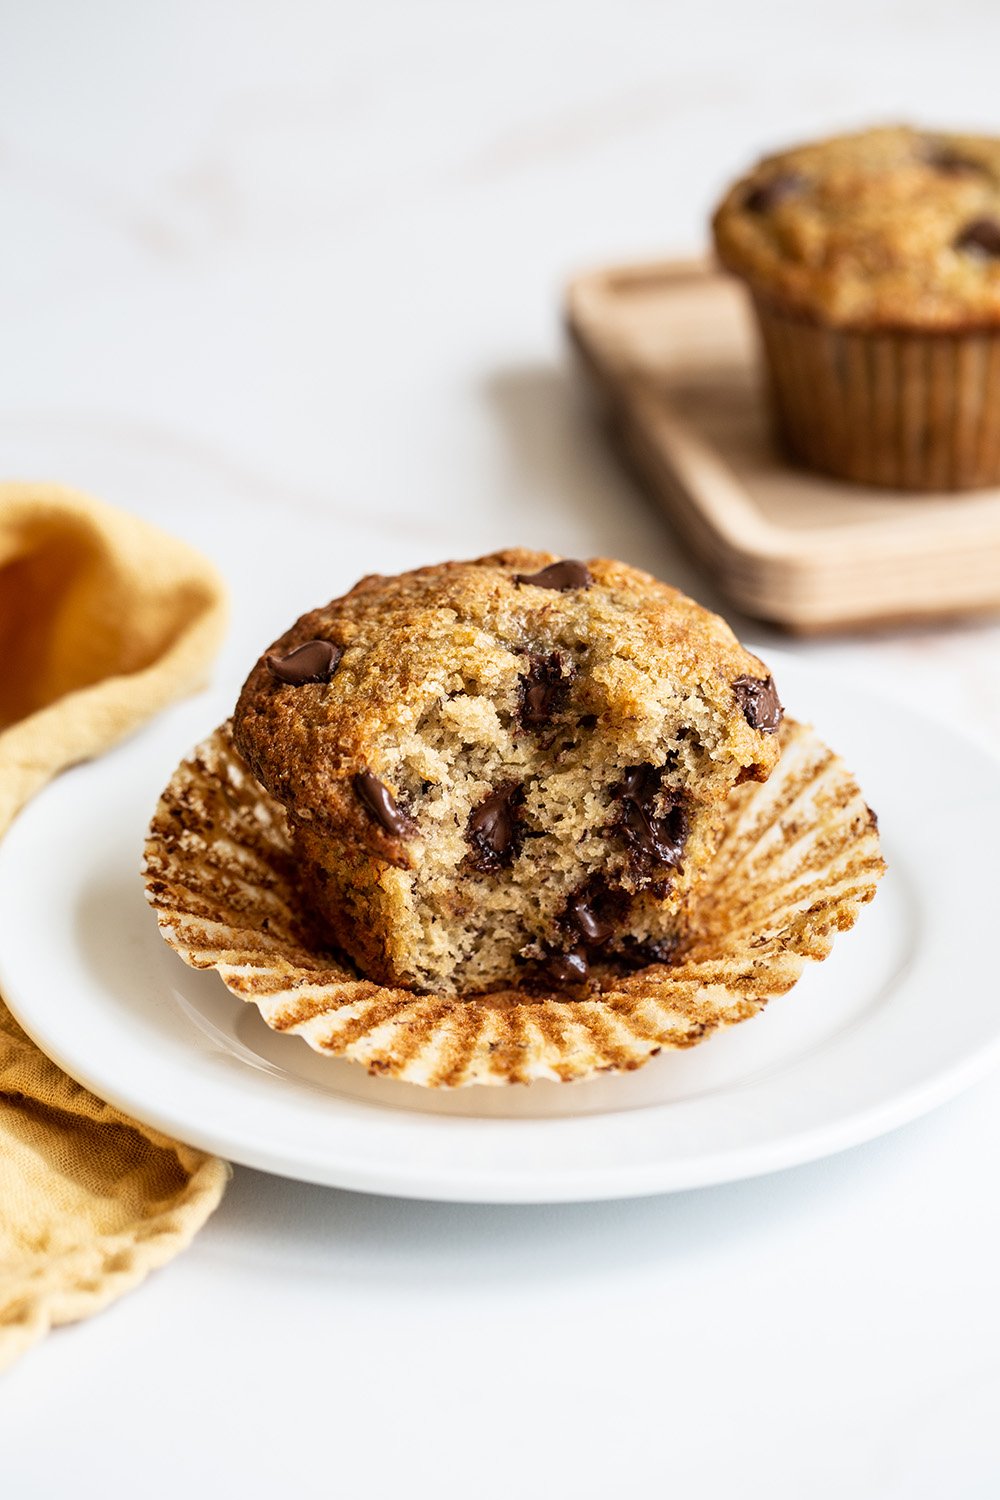 so many gooey chocolate chips in this delicious banana chocolate chip muffin